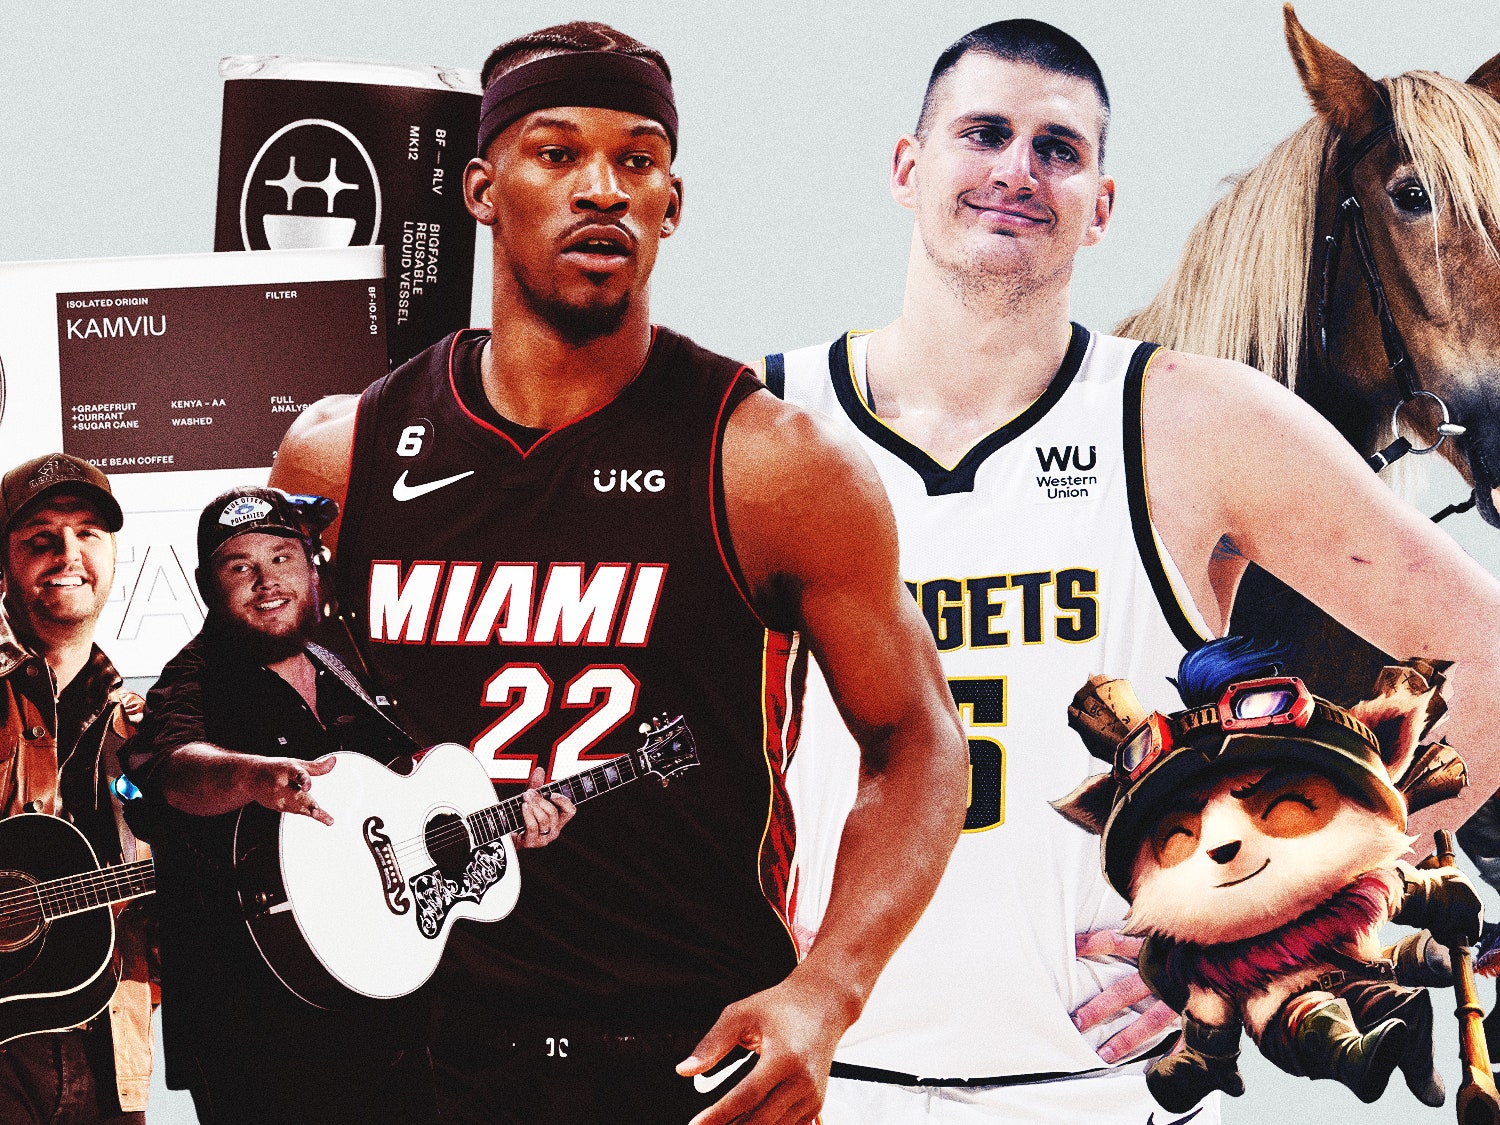 Welcome to the Oddball NBA Finals